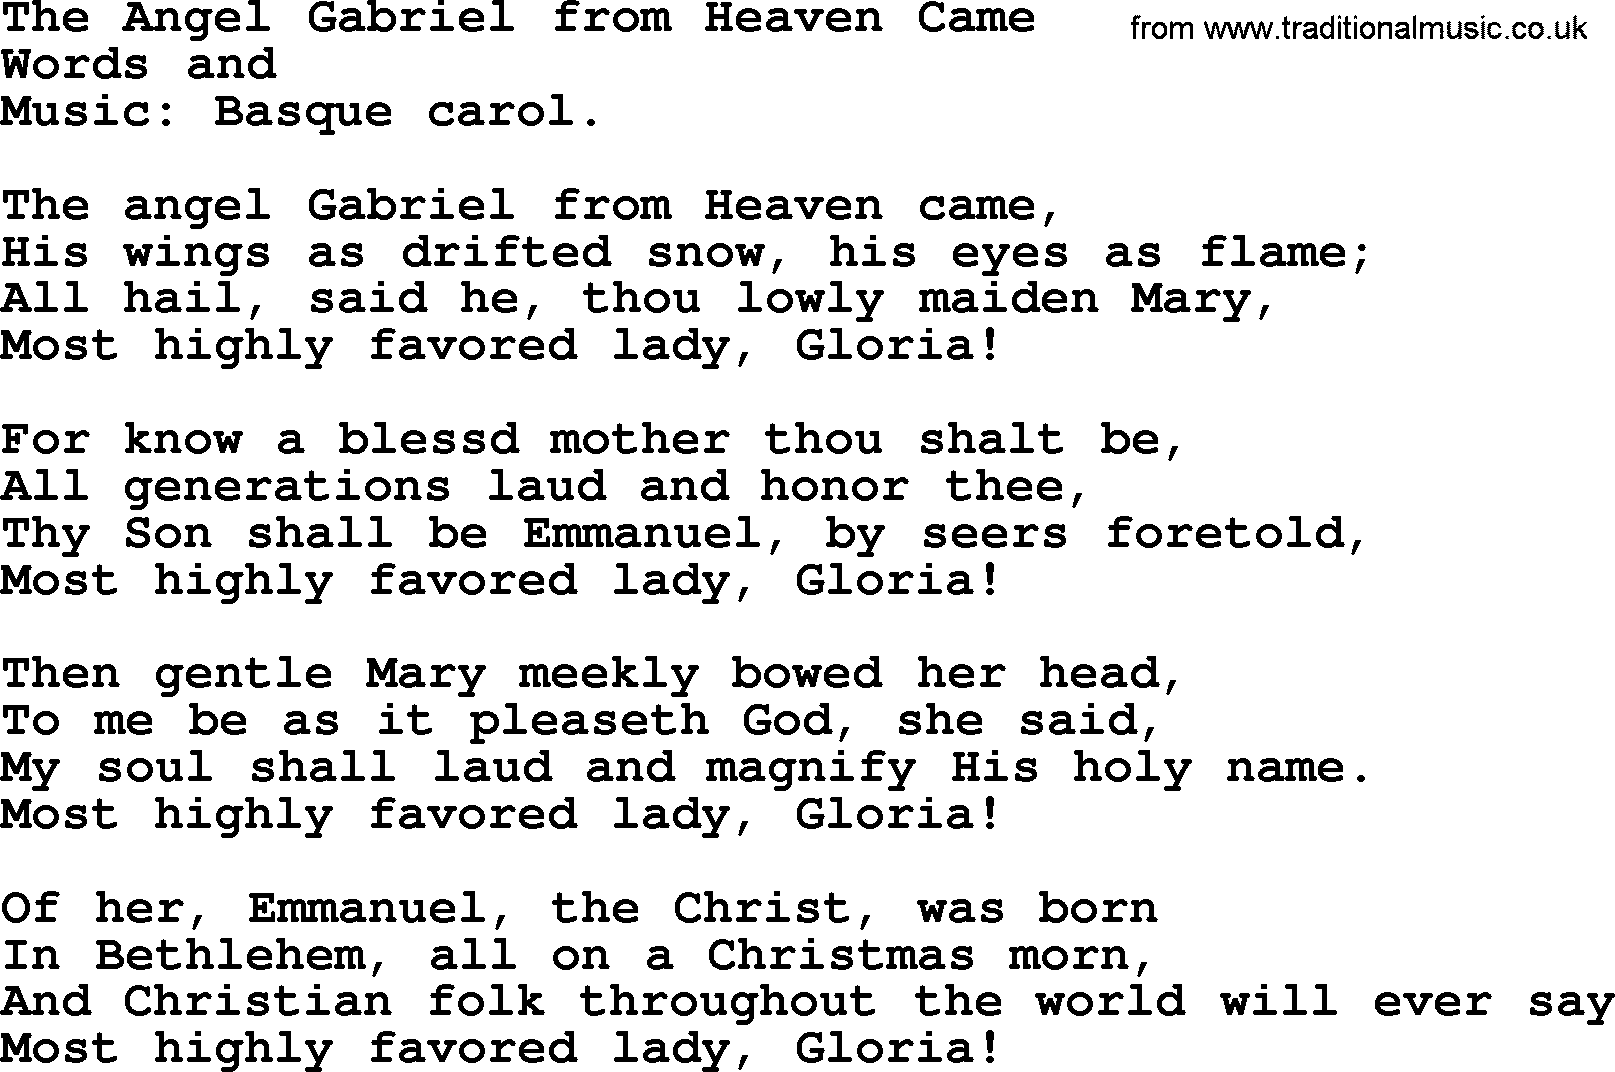 Christmas Hymns, Carols and Songs, title: The Angel Gabriel From Heaven Came - complete lyrics ...